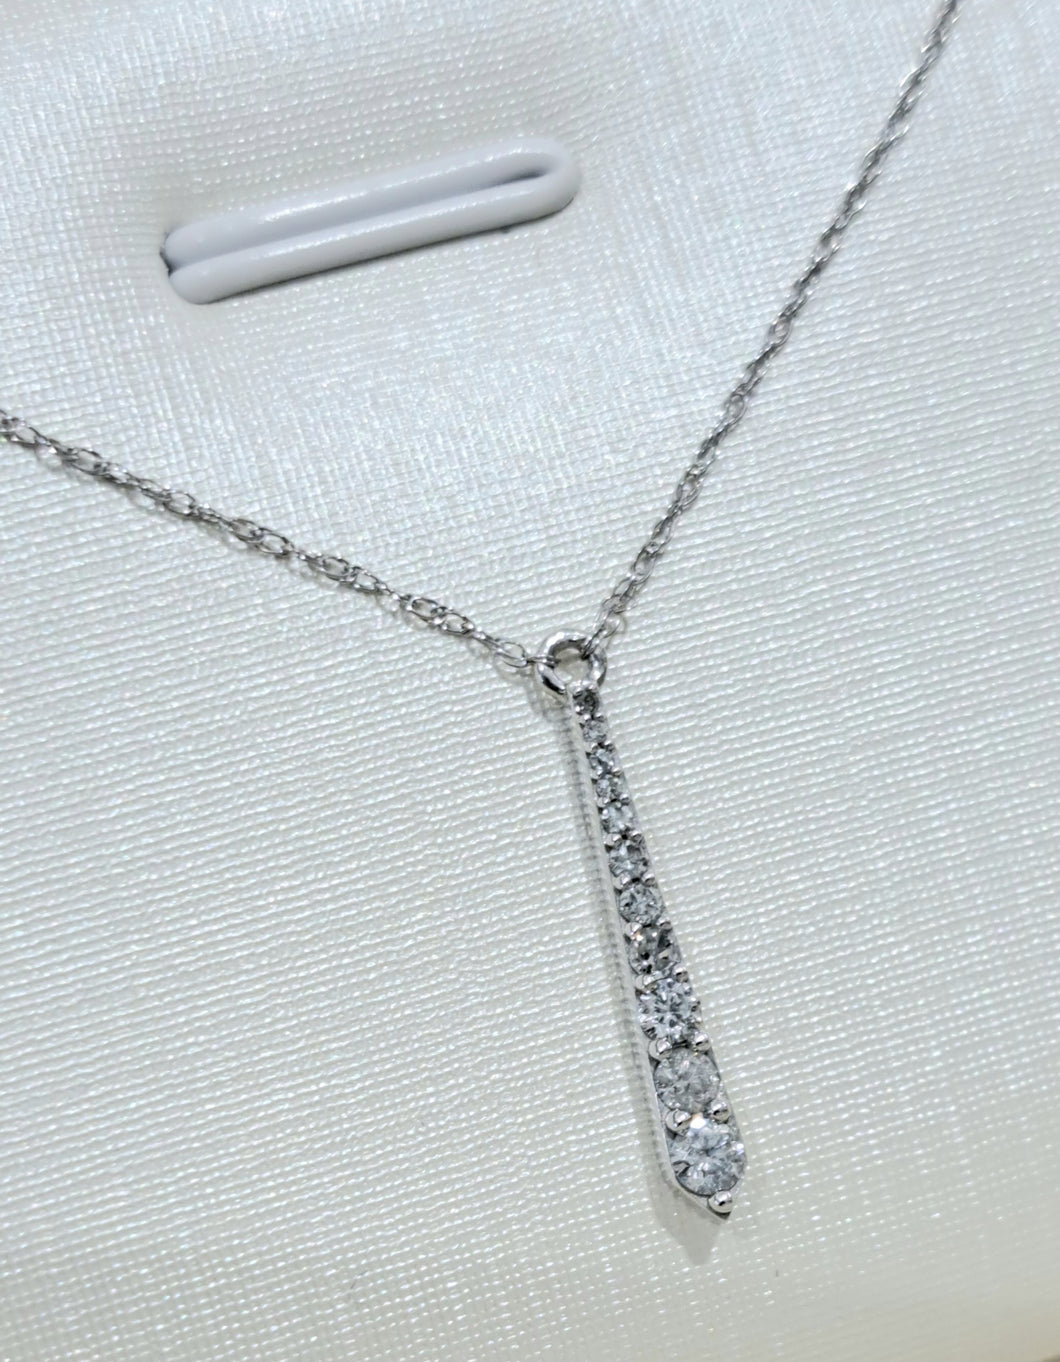 0.160cts [11] Round Cut Diamonds | Pendant and Chain | 10kt White Gold